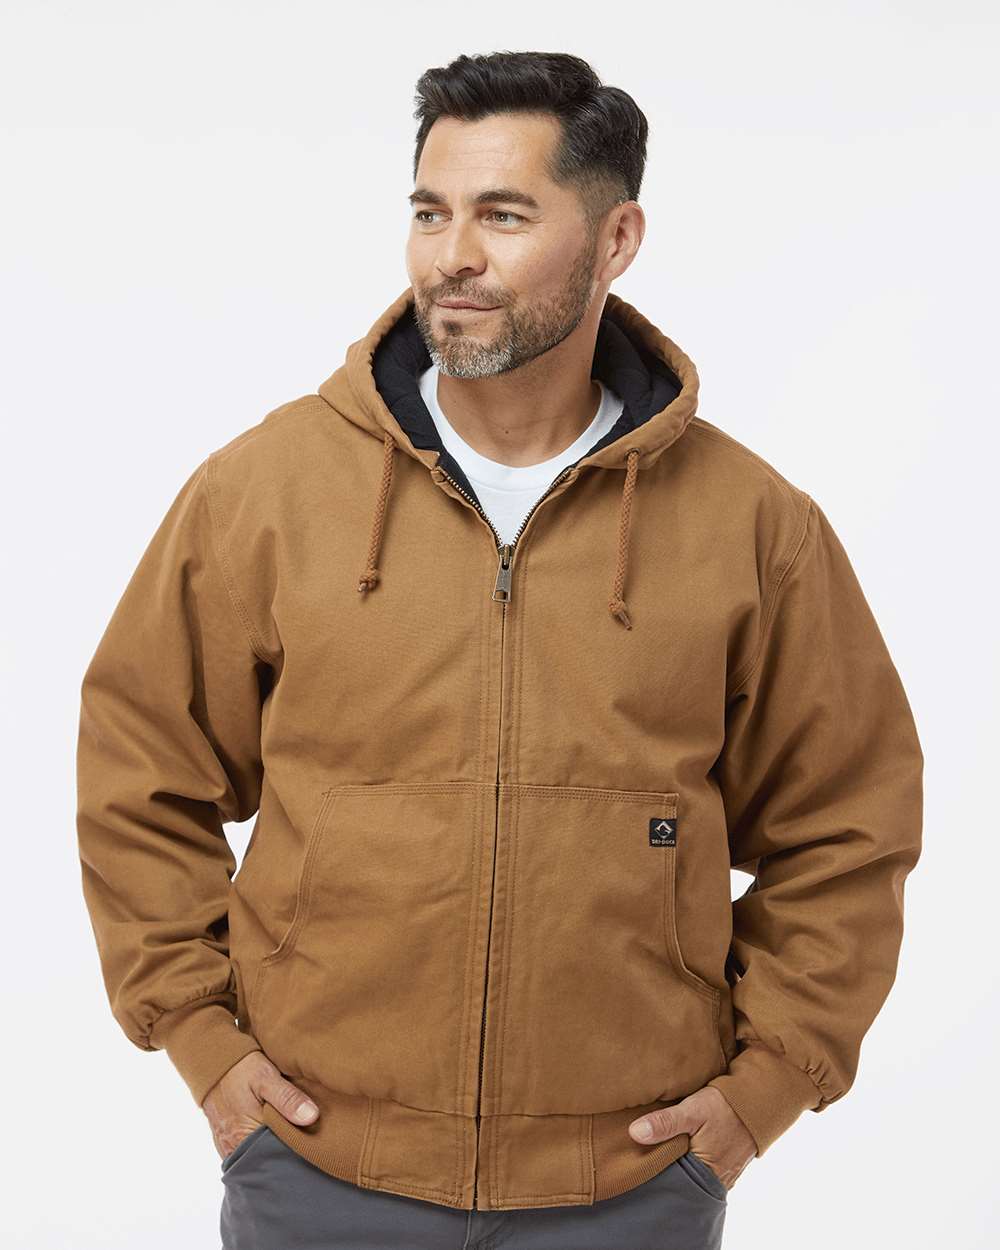 Cheyenne Boulder Cloth™ Hooded Men's Jacket with Tricot Quilt Lining - DRI DUCK 5020